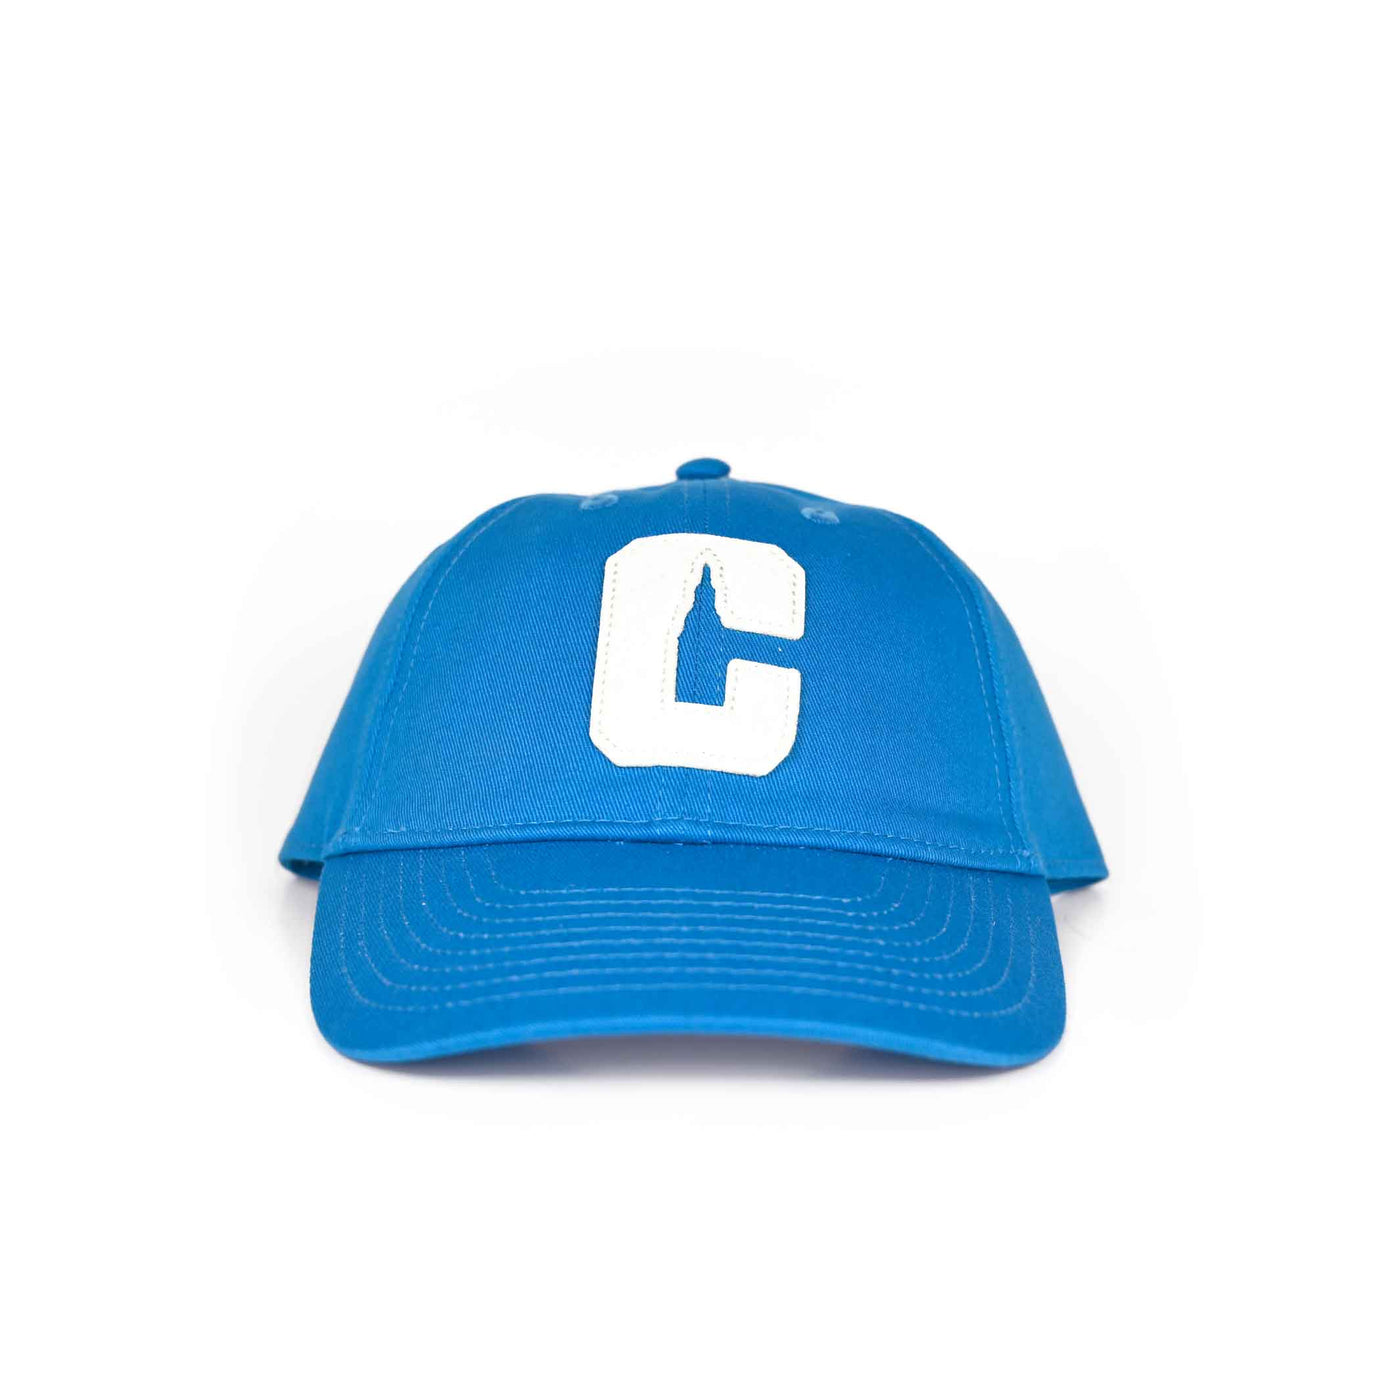 Var'City' Youth Hat - Electric Blue